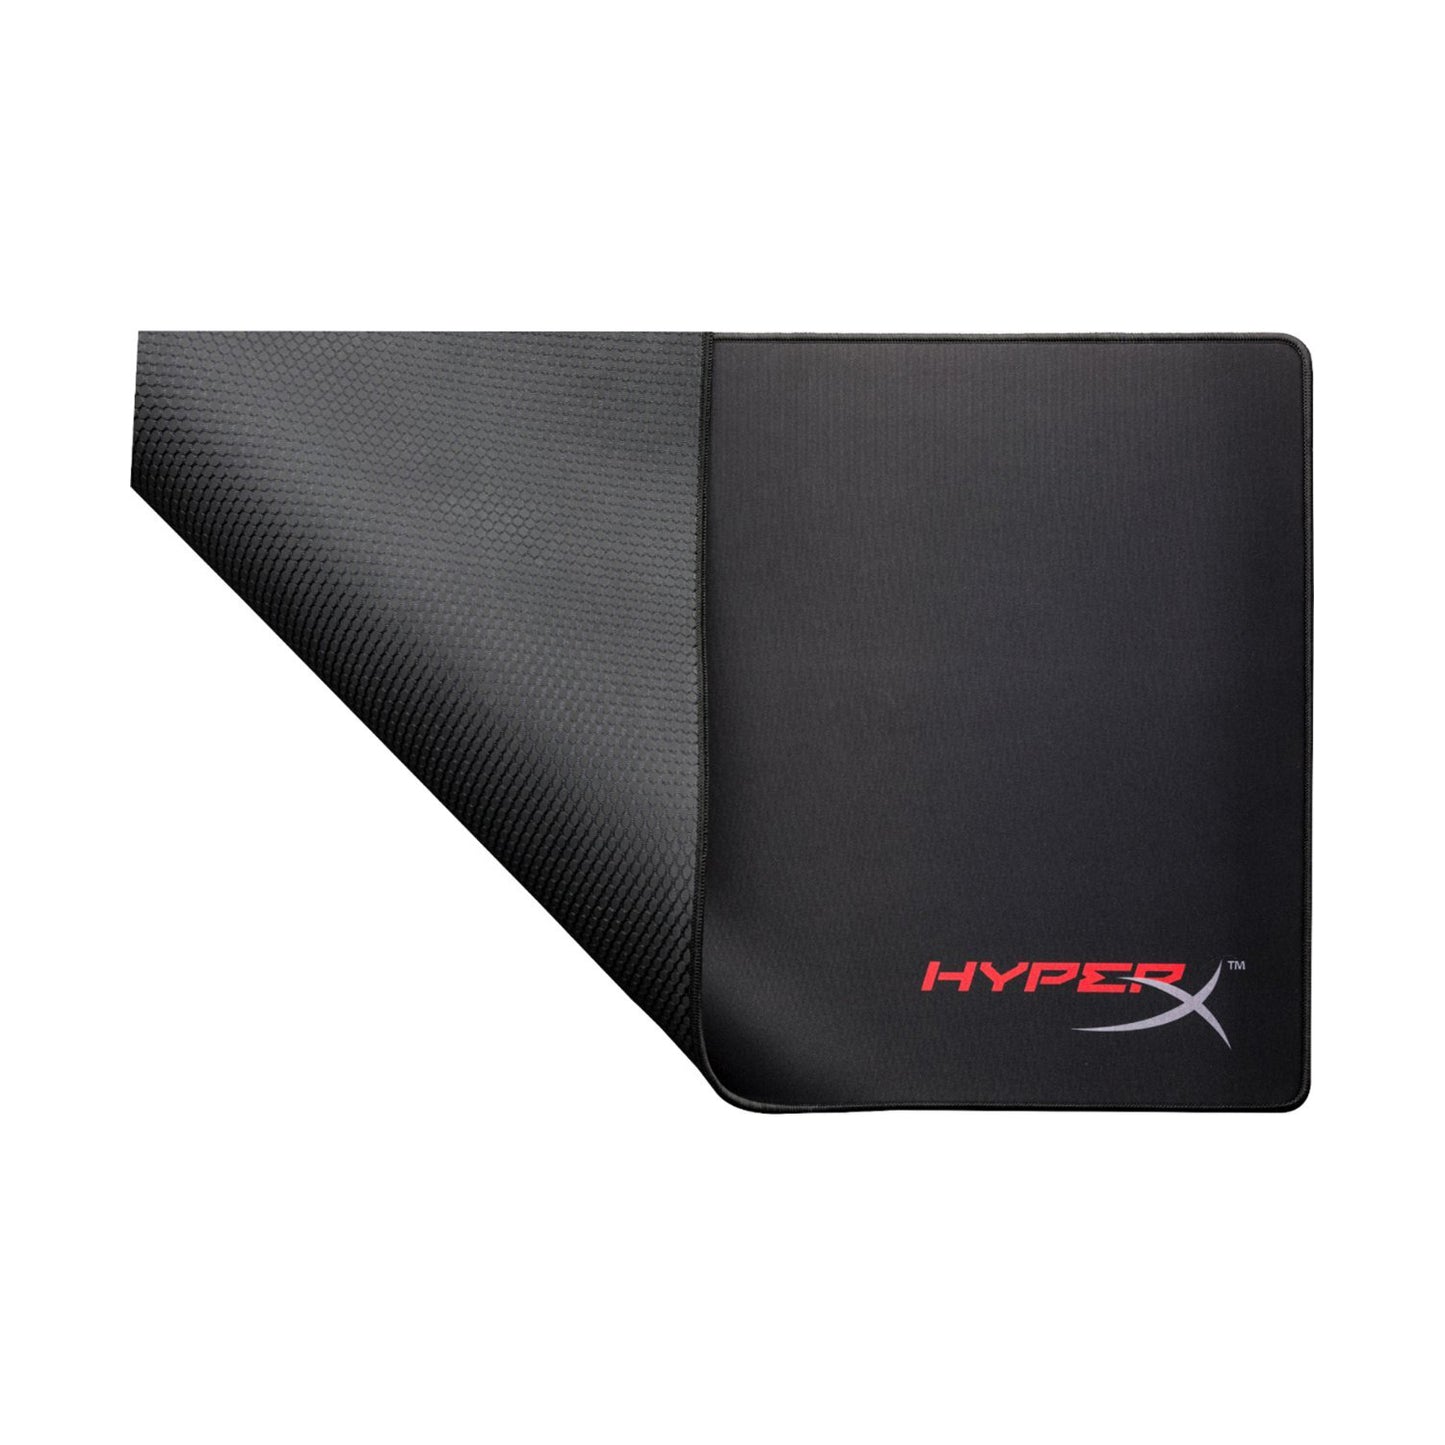 Hyperx Fury S | X-Large Size Pro Gaming Mouse Pad (Brand New)